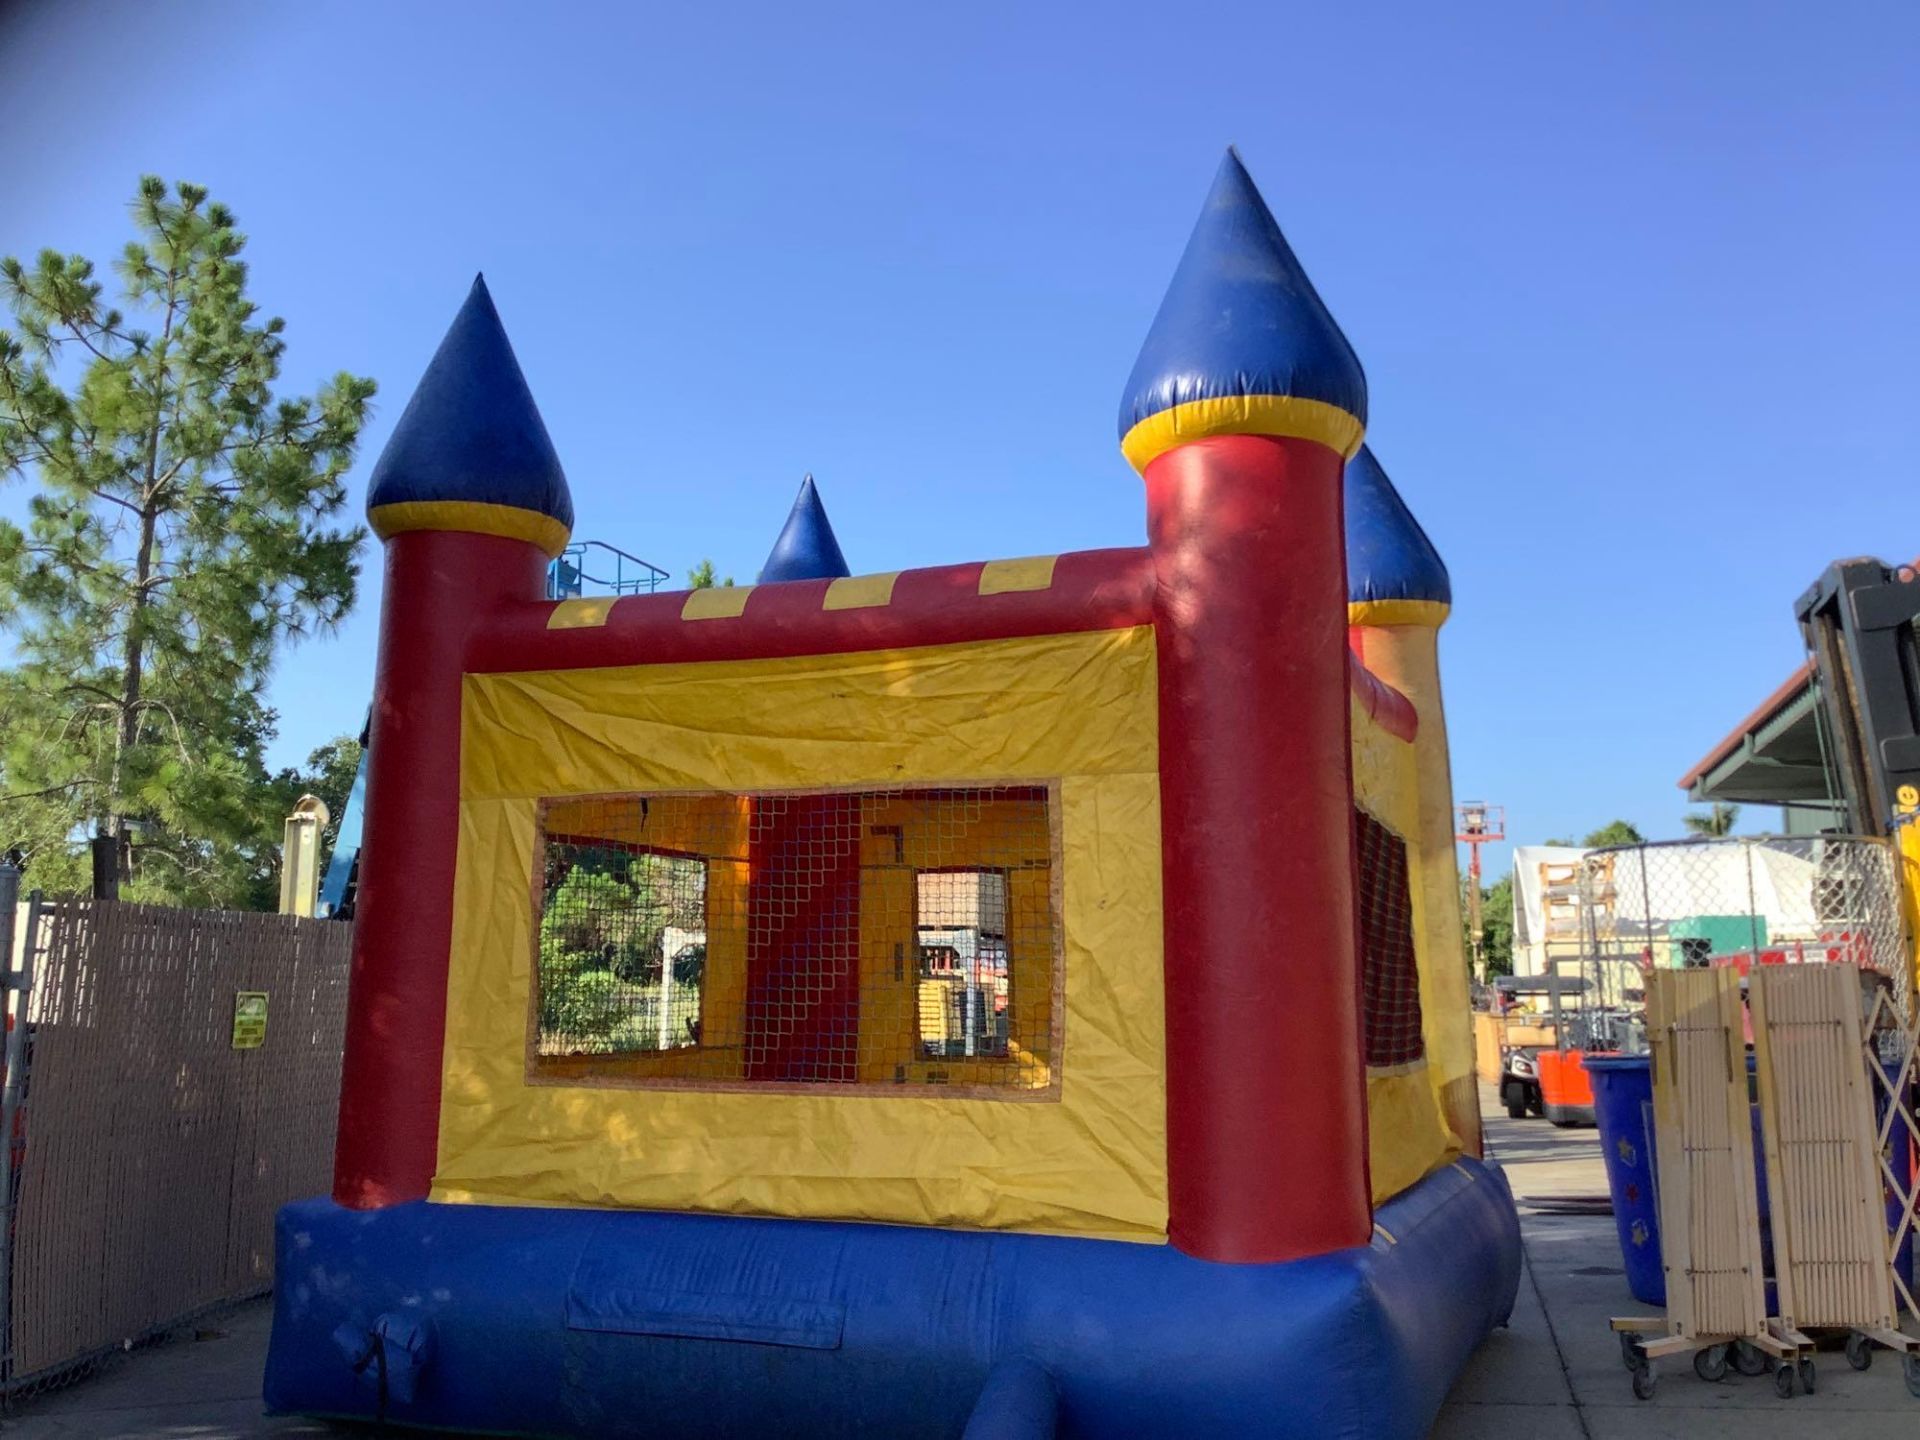 JUMPION CASTLE BOUNCE HOUSE, APPROX 13’ x 13’ - Image 7 of 7